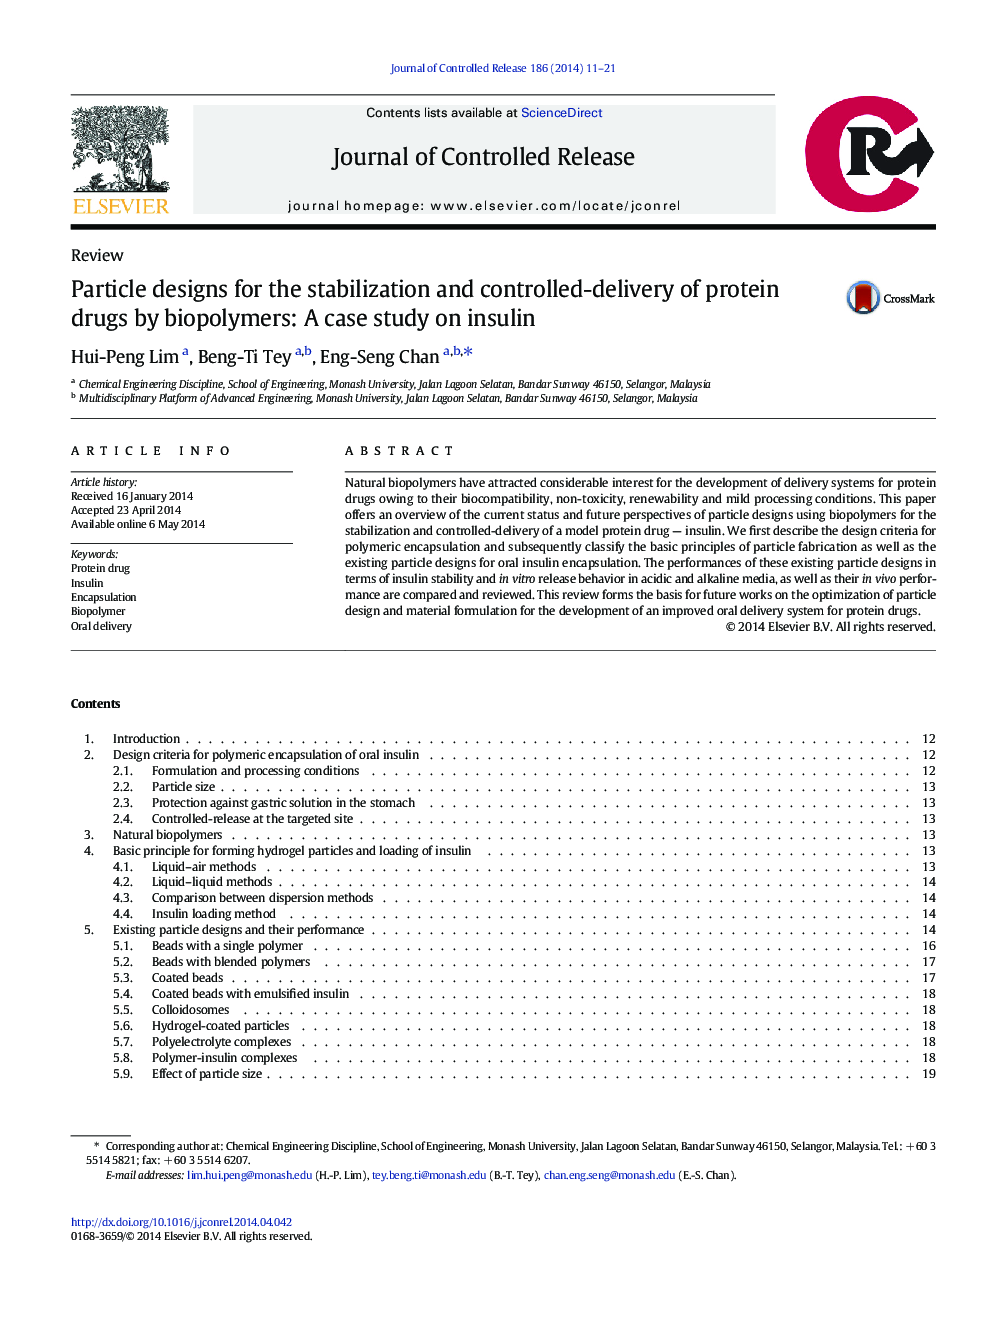 Particle designs for the stabilization and controlled-delivery of protein drugs by biopolymers: A case study on insulin